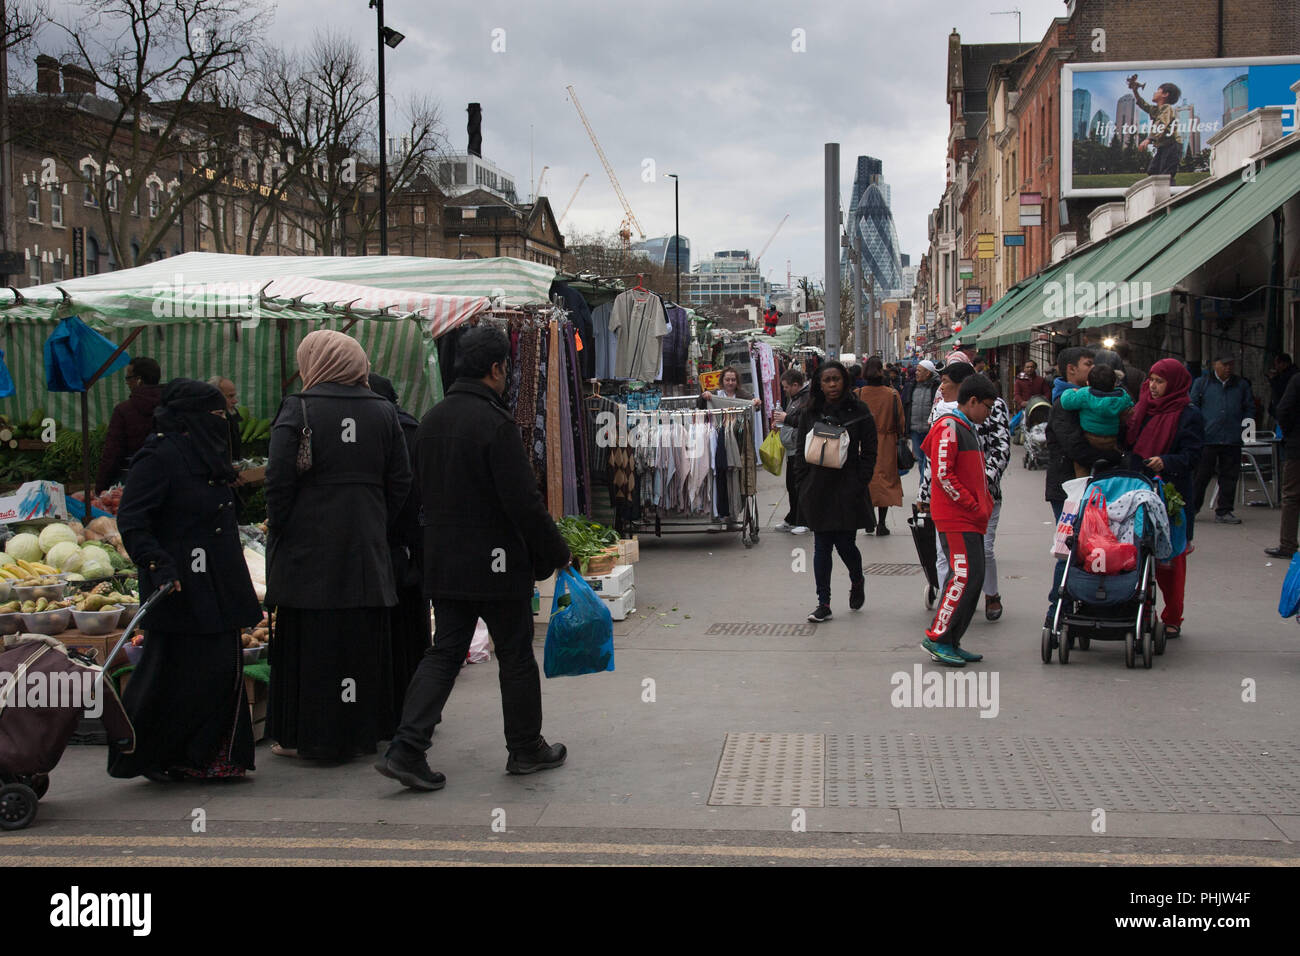 View of shoppers and market stalls on Whitechapel Road, Tower Hamlets, East London, looking towards the Gherkin (30 St Mary Axe) and the City, 2016. Stock Photo